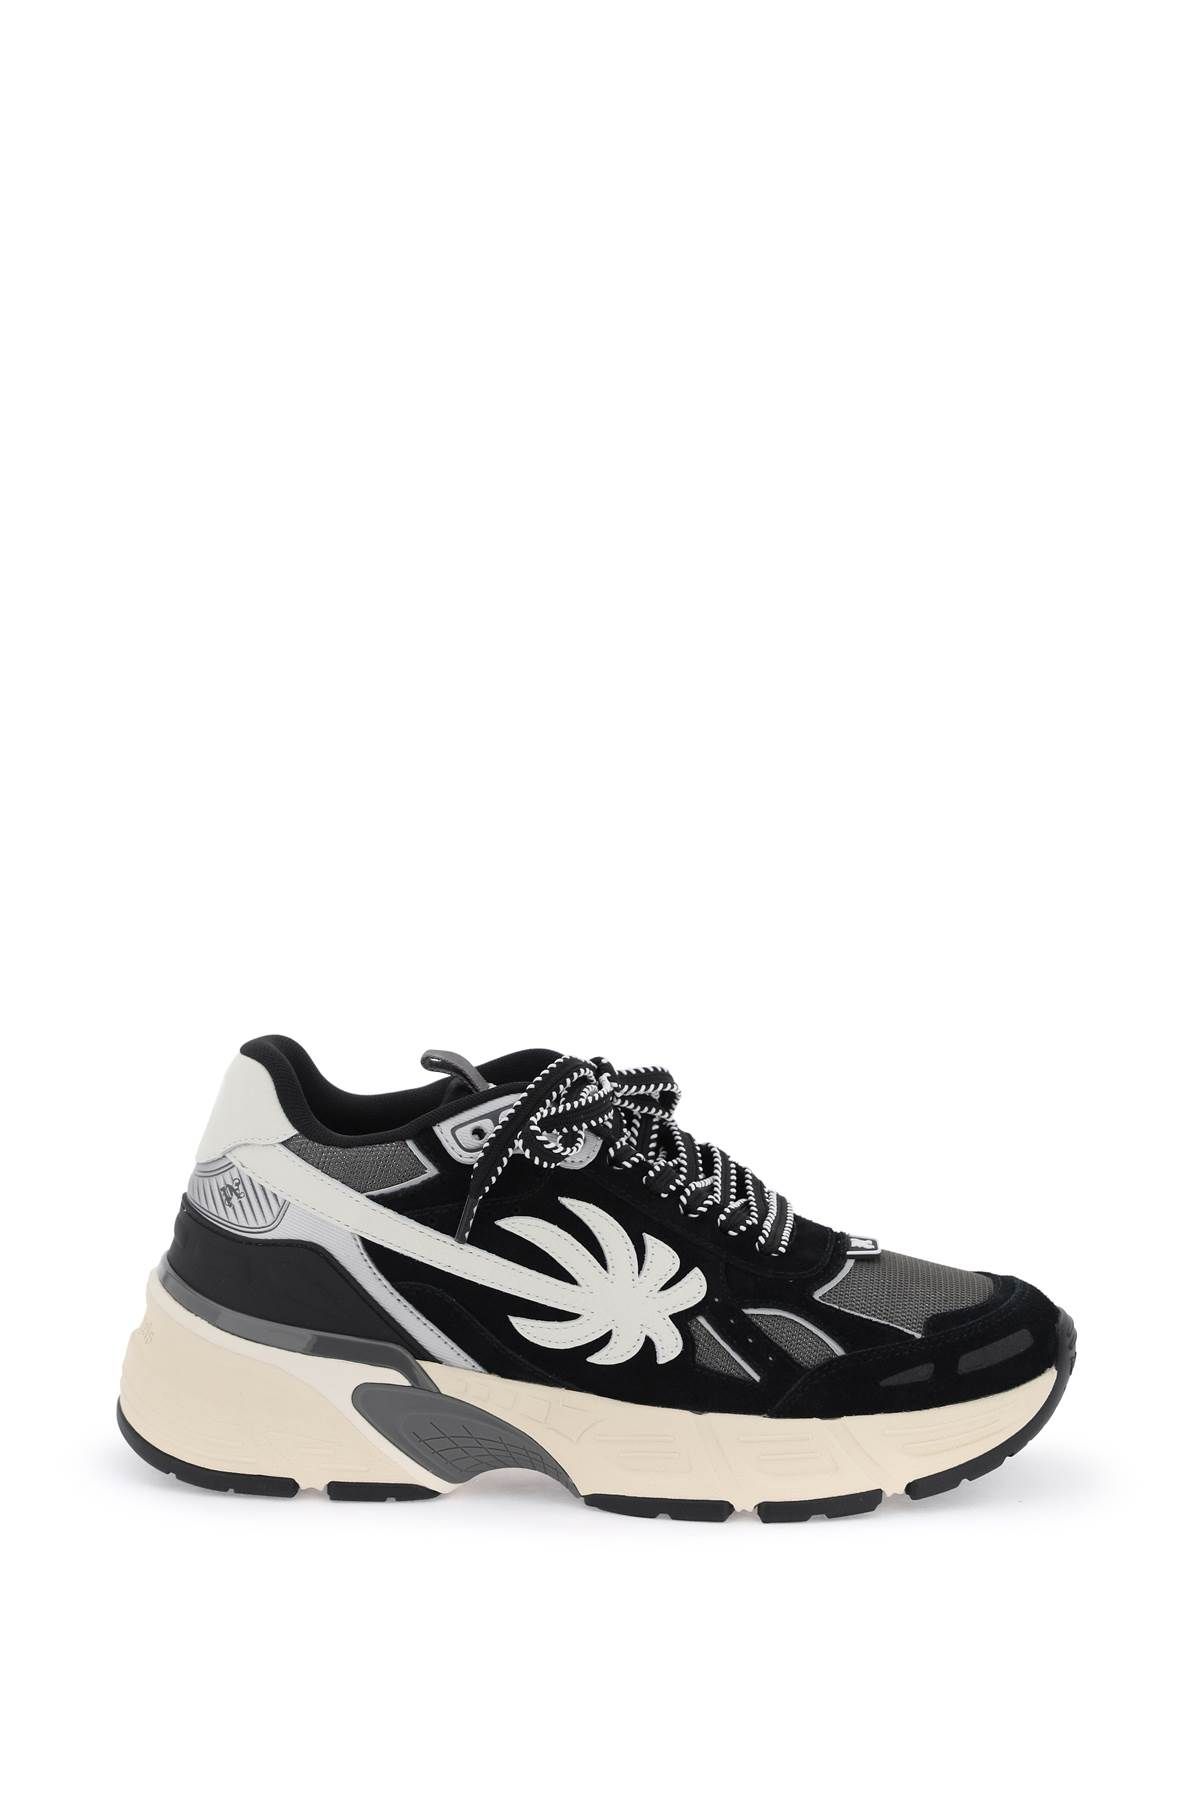 Shop Palm Angels Suede Leather Pa 4 Sneakers With In Black,silver